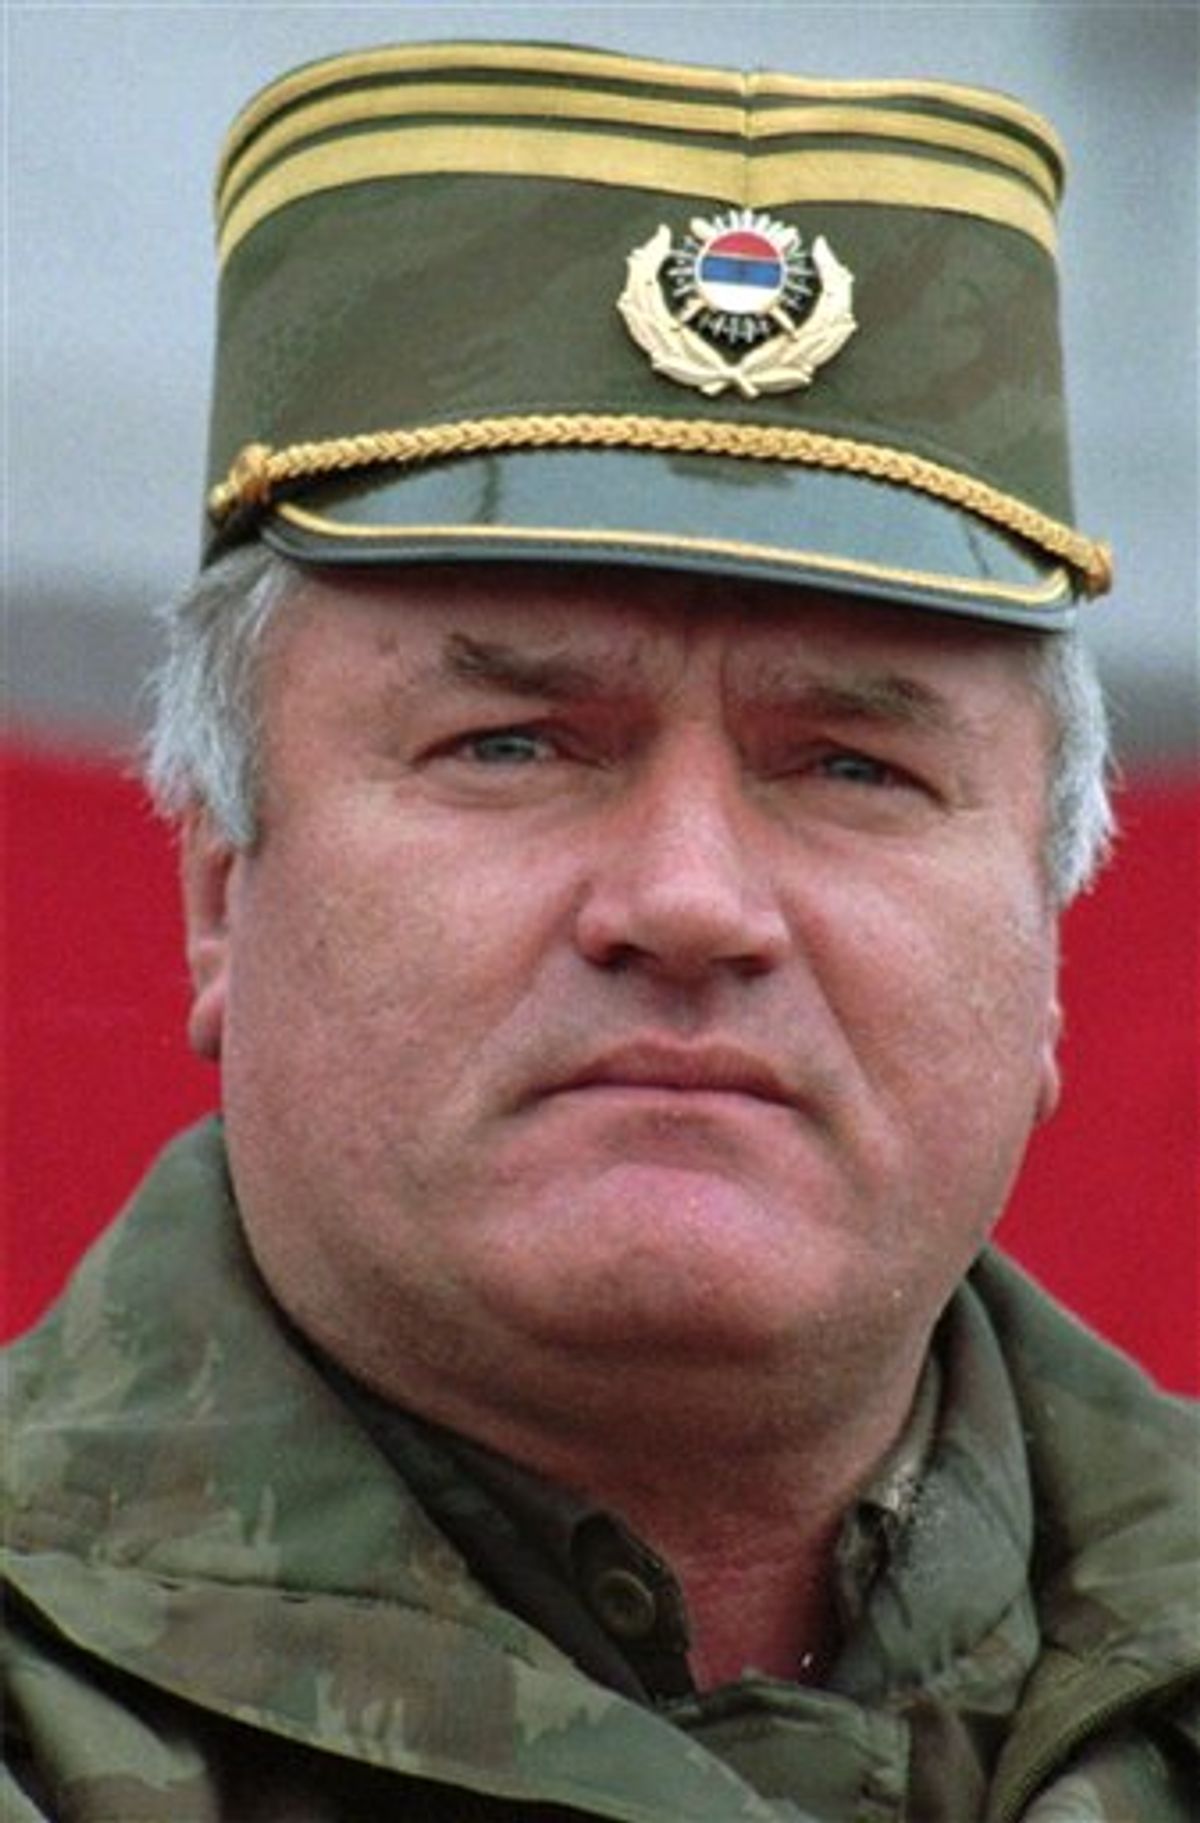 FILE - Bosnian-Serb General Ratko Mladic is seen in this 1995 file photo during a visit to troops in the east Bosnian town of Vlasenica.  Belgrade's B-92 radio reports Thursday May 26, 2011 that a man suspected to be Europe's most wanted war crimes fugitive Ratko Mladic has been arrested in Serbia. Serbia's war crimes prosecutors refused to confirm or deny the report.   (AP Photo/Oleg Stjepanovic) (AP)